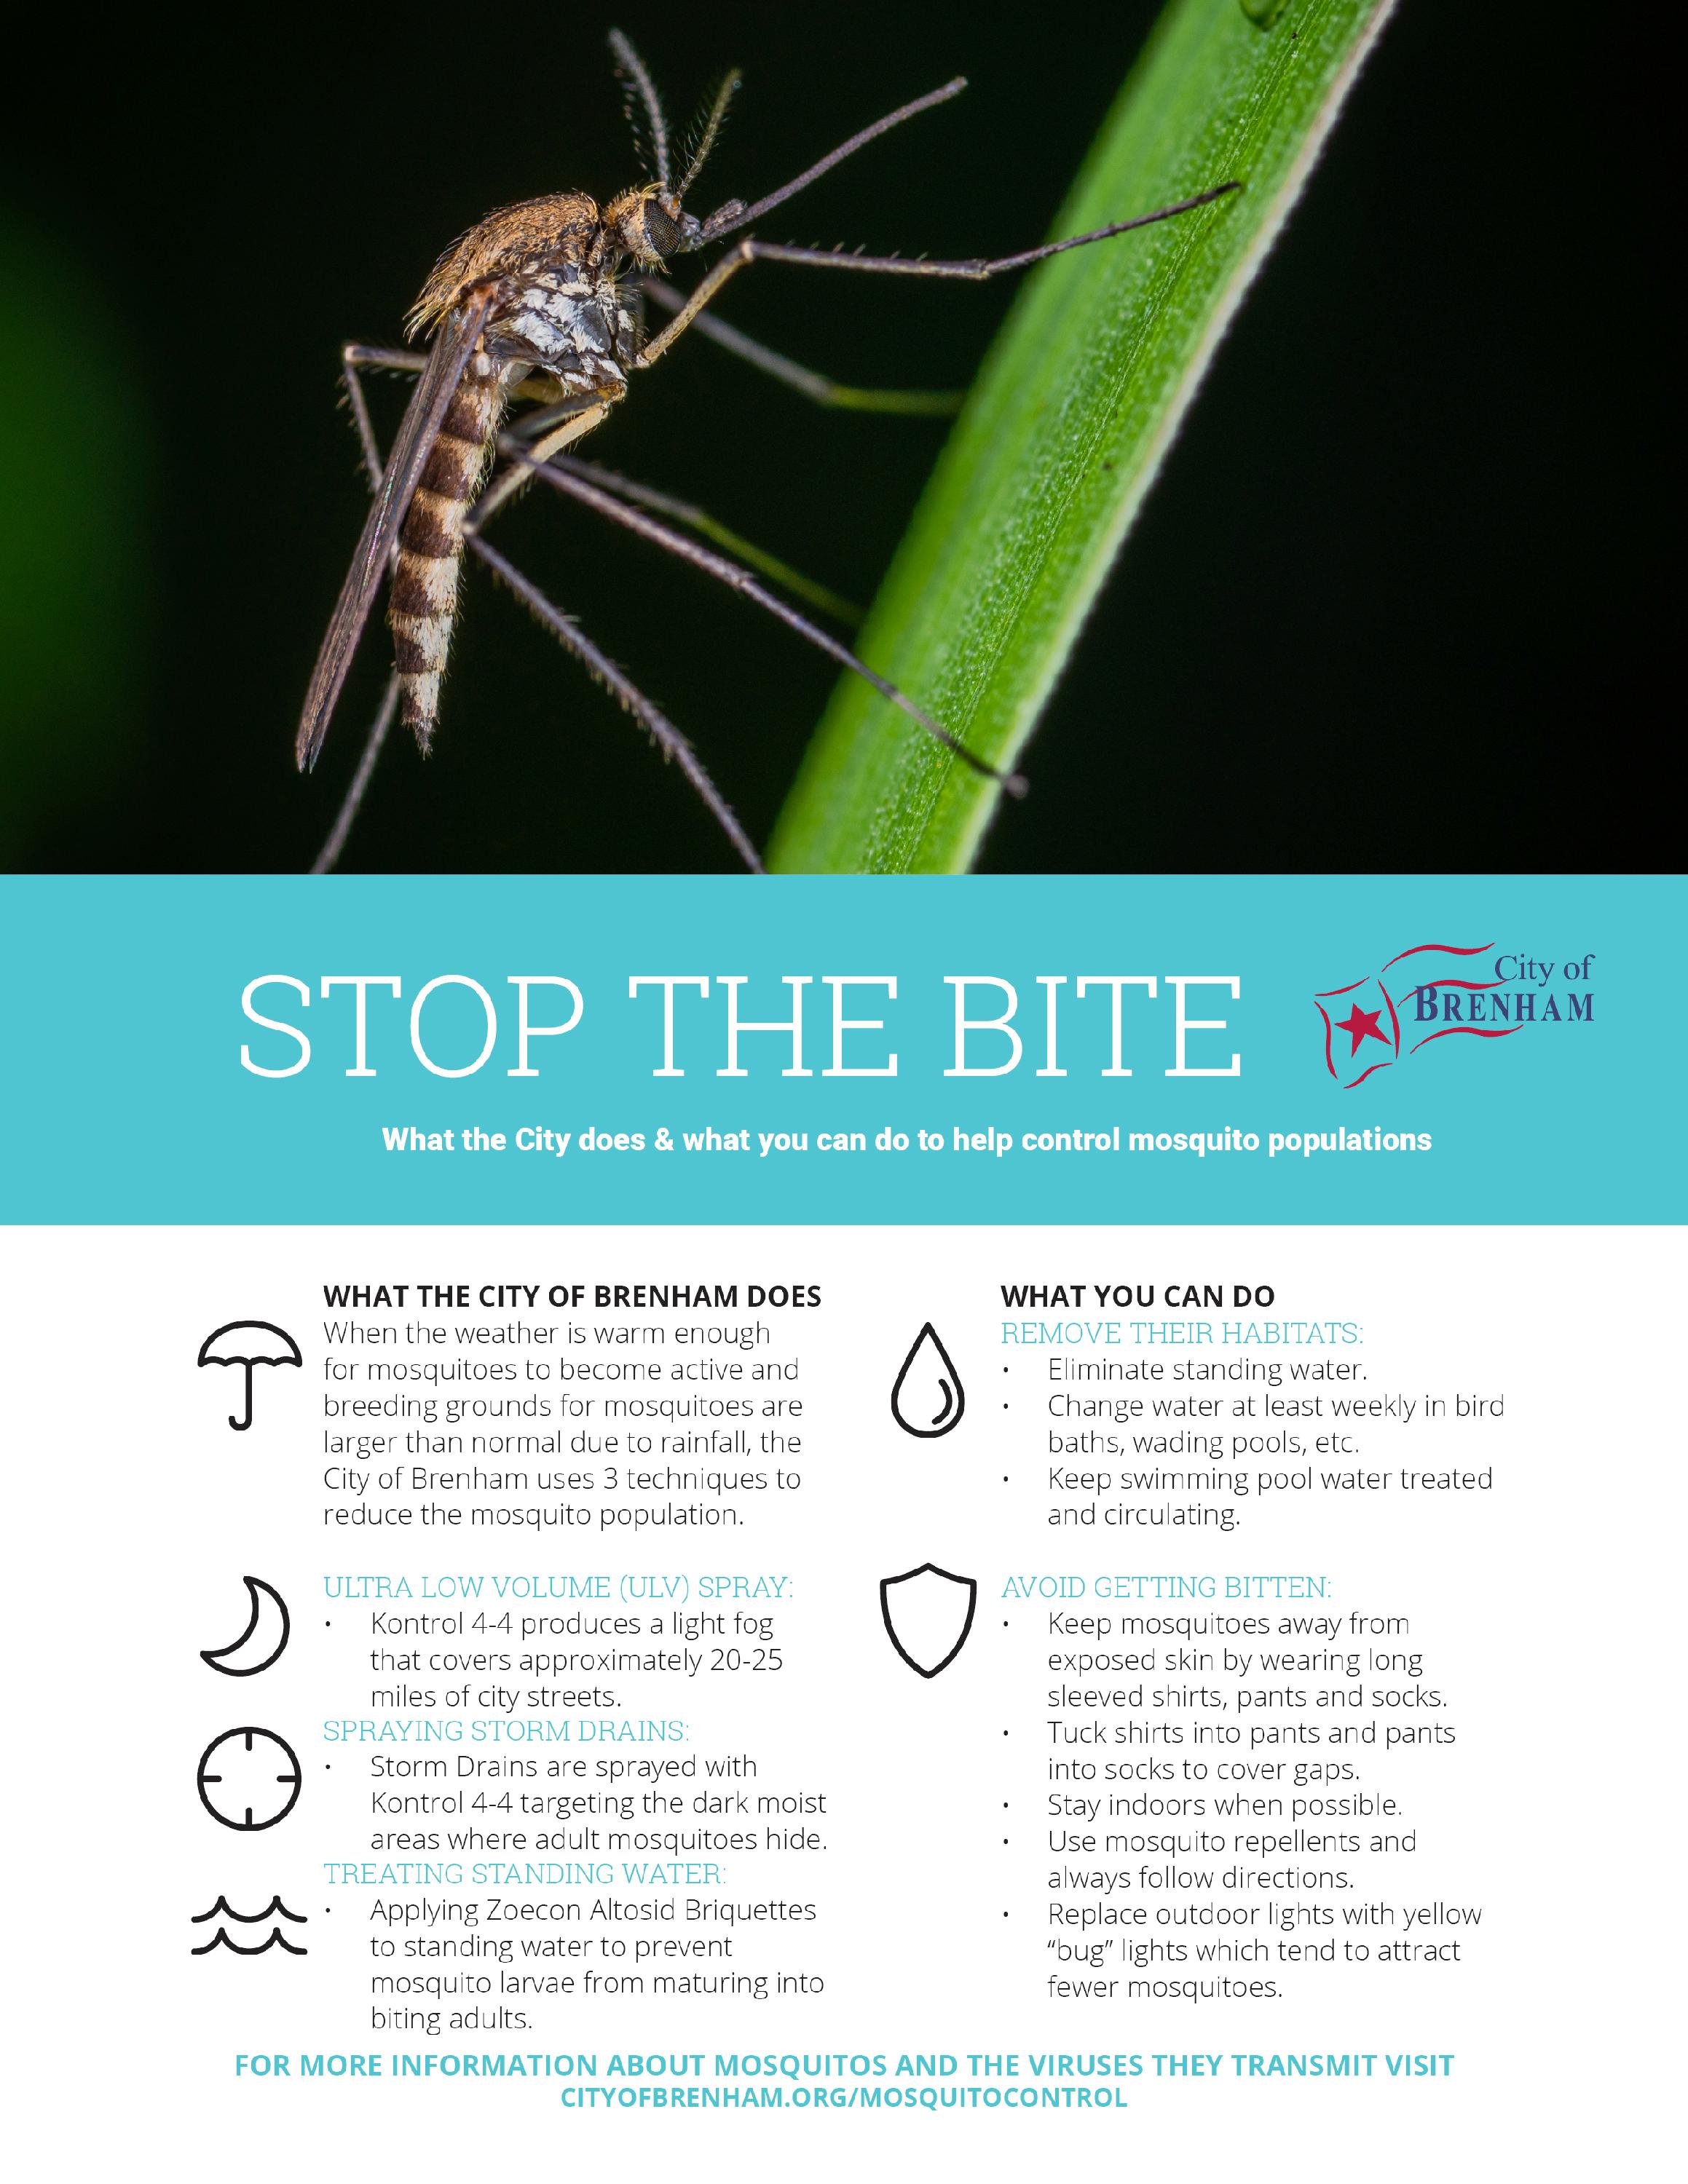 stop the bite - mosquito control - download full document for full text or visit cityofbrenham.org/mosquitocontrol